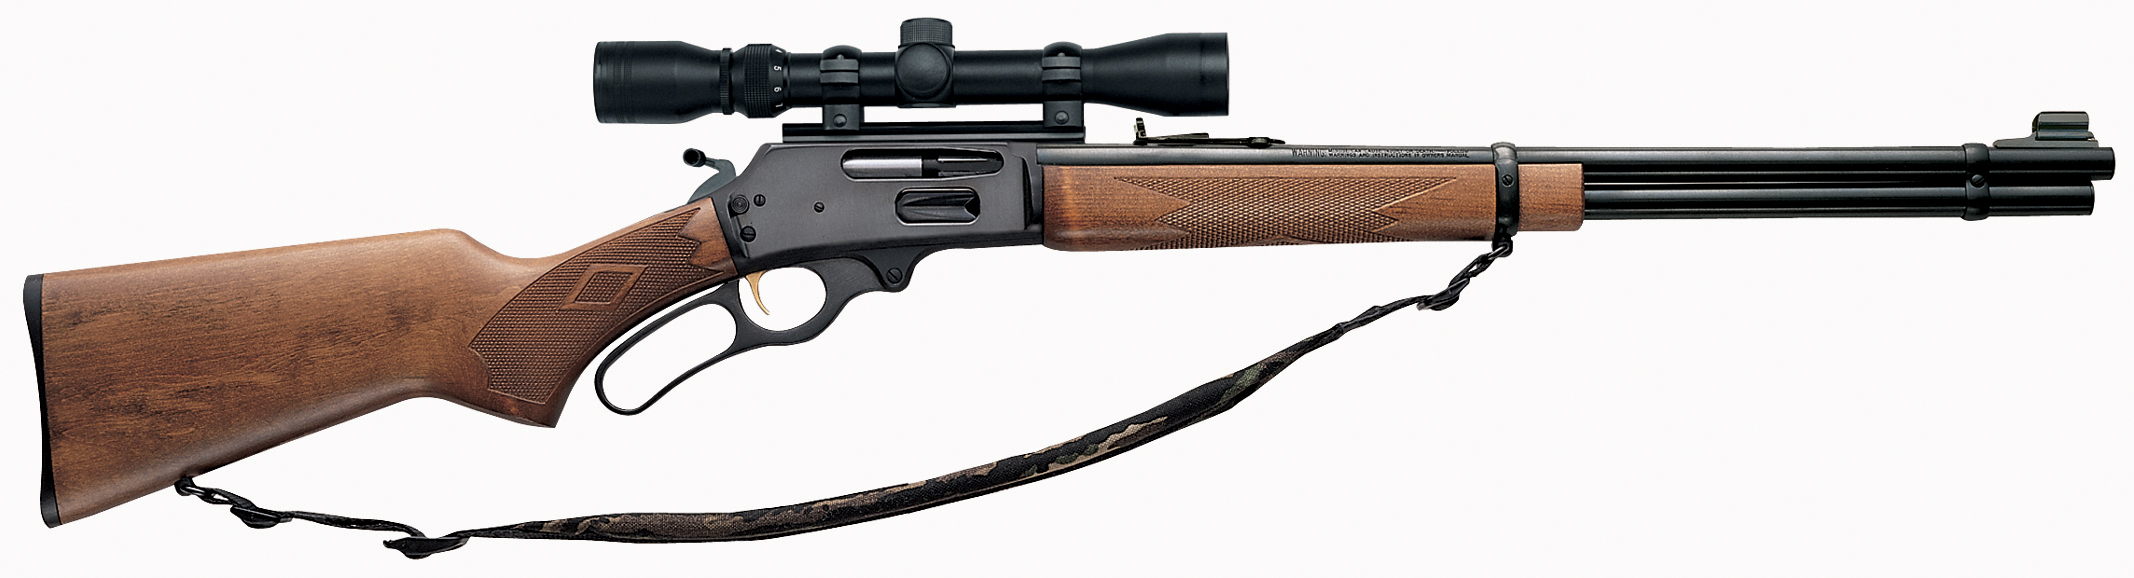 Guns For Sale Marlin Model Lever Action Rifle HD Walls